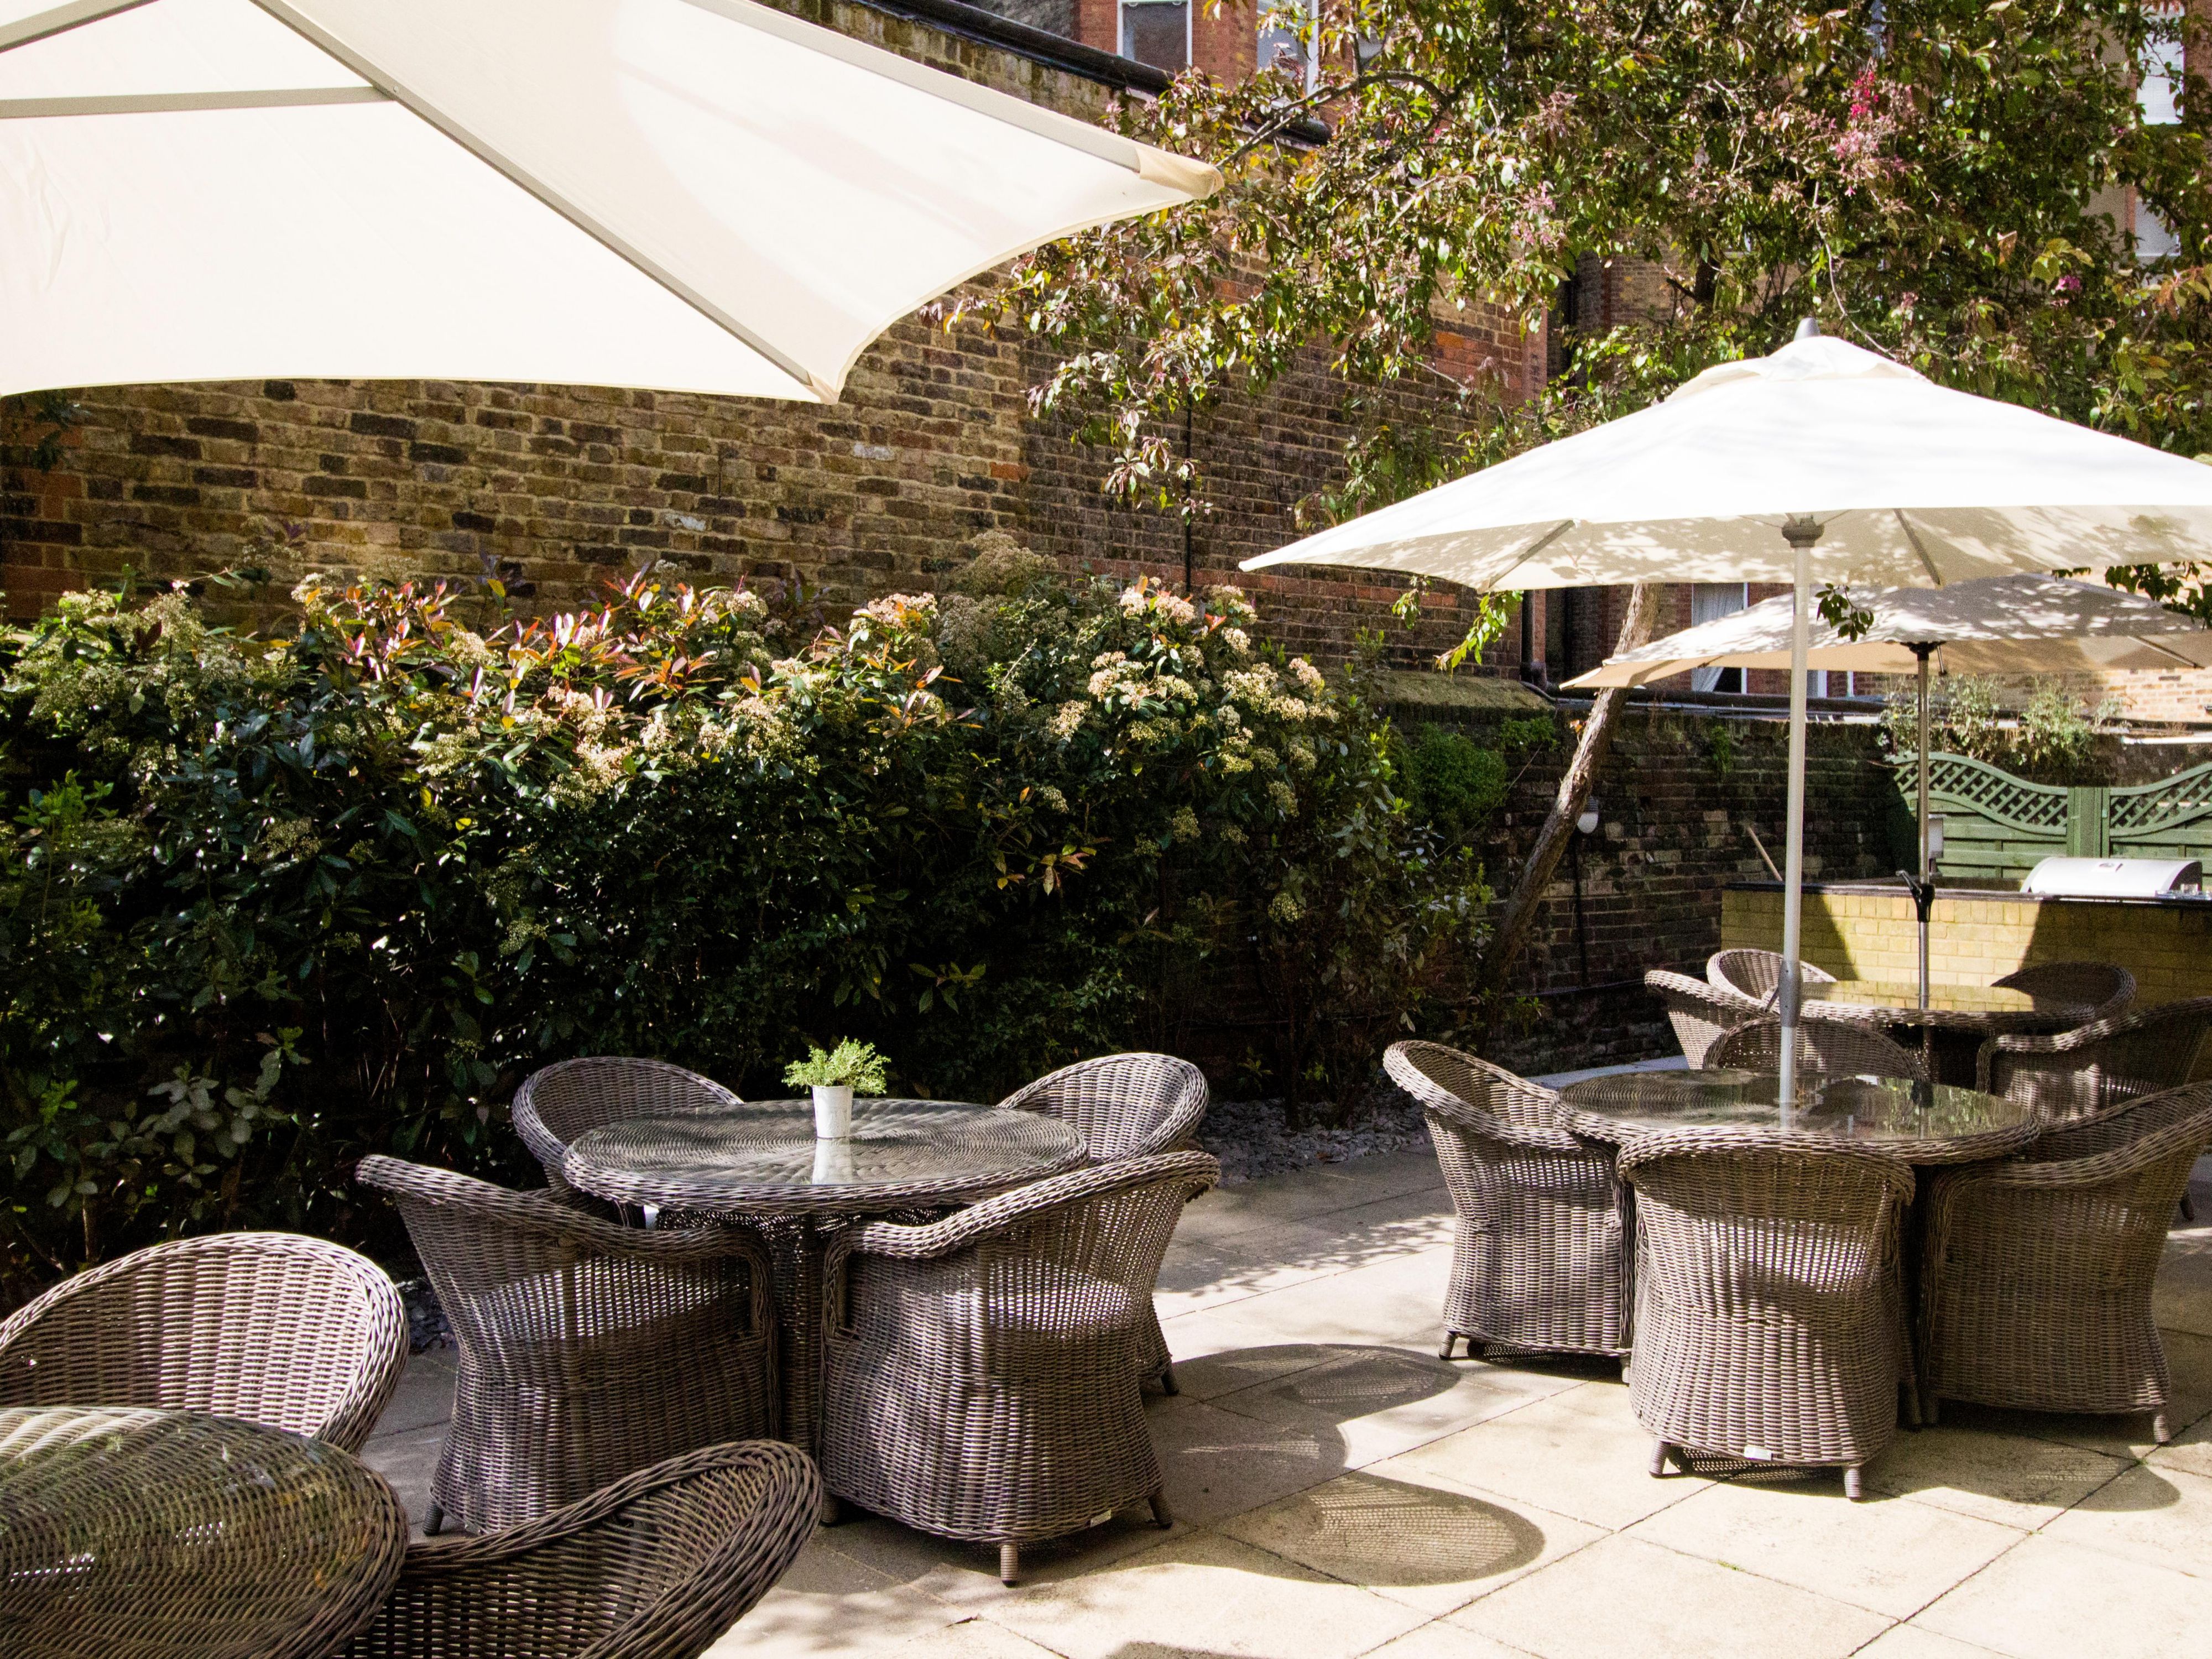 Our hotel has a stunning private garden and features which you will have exclusive access to.